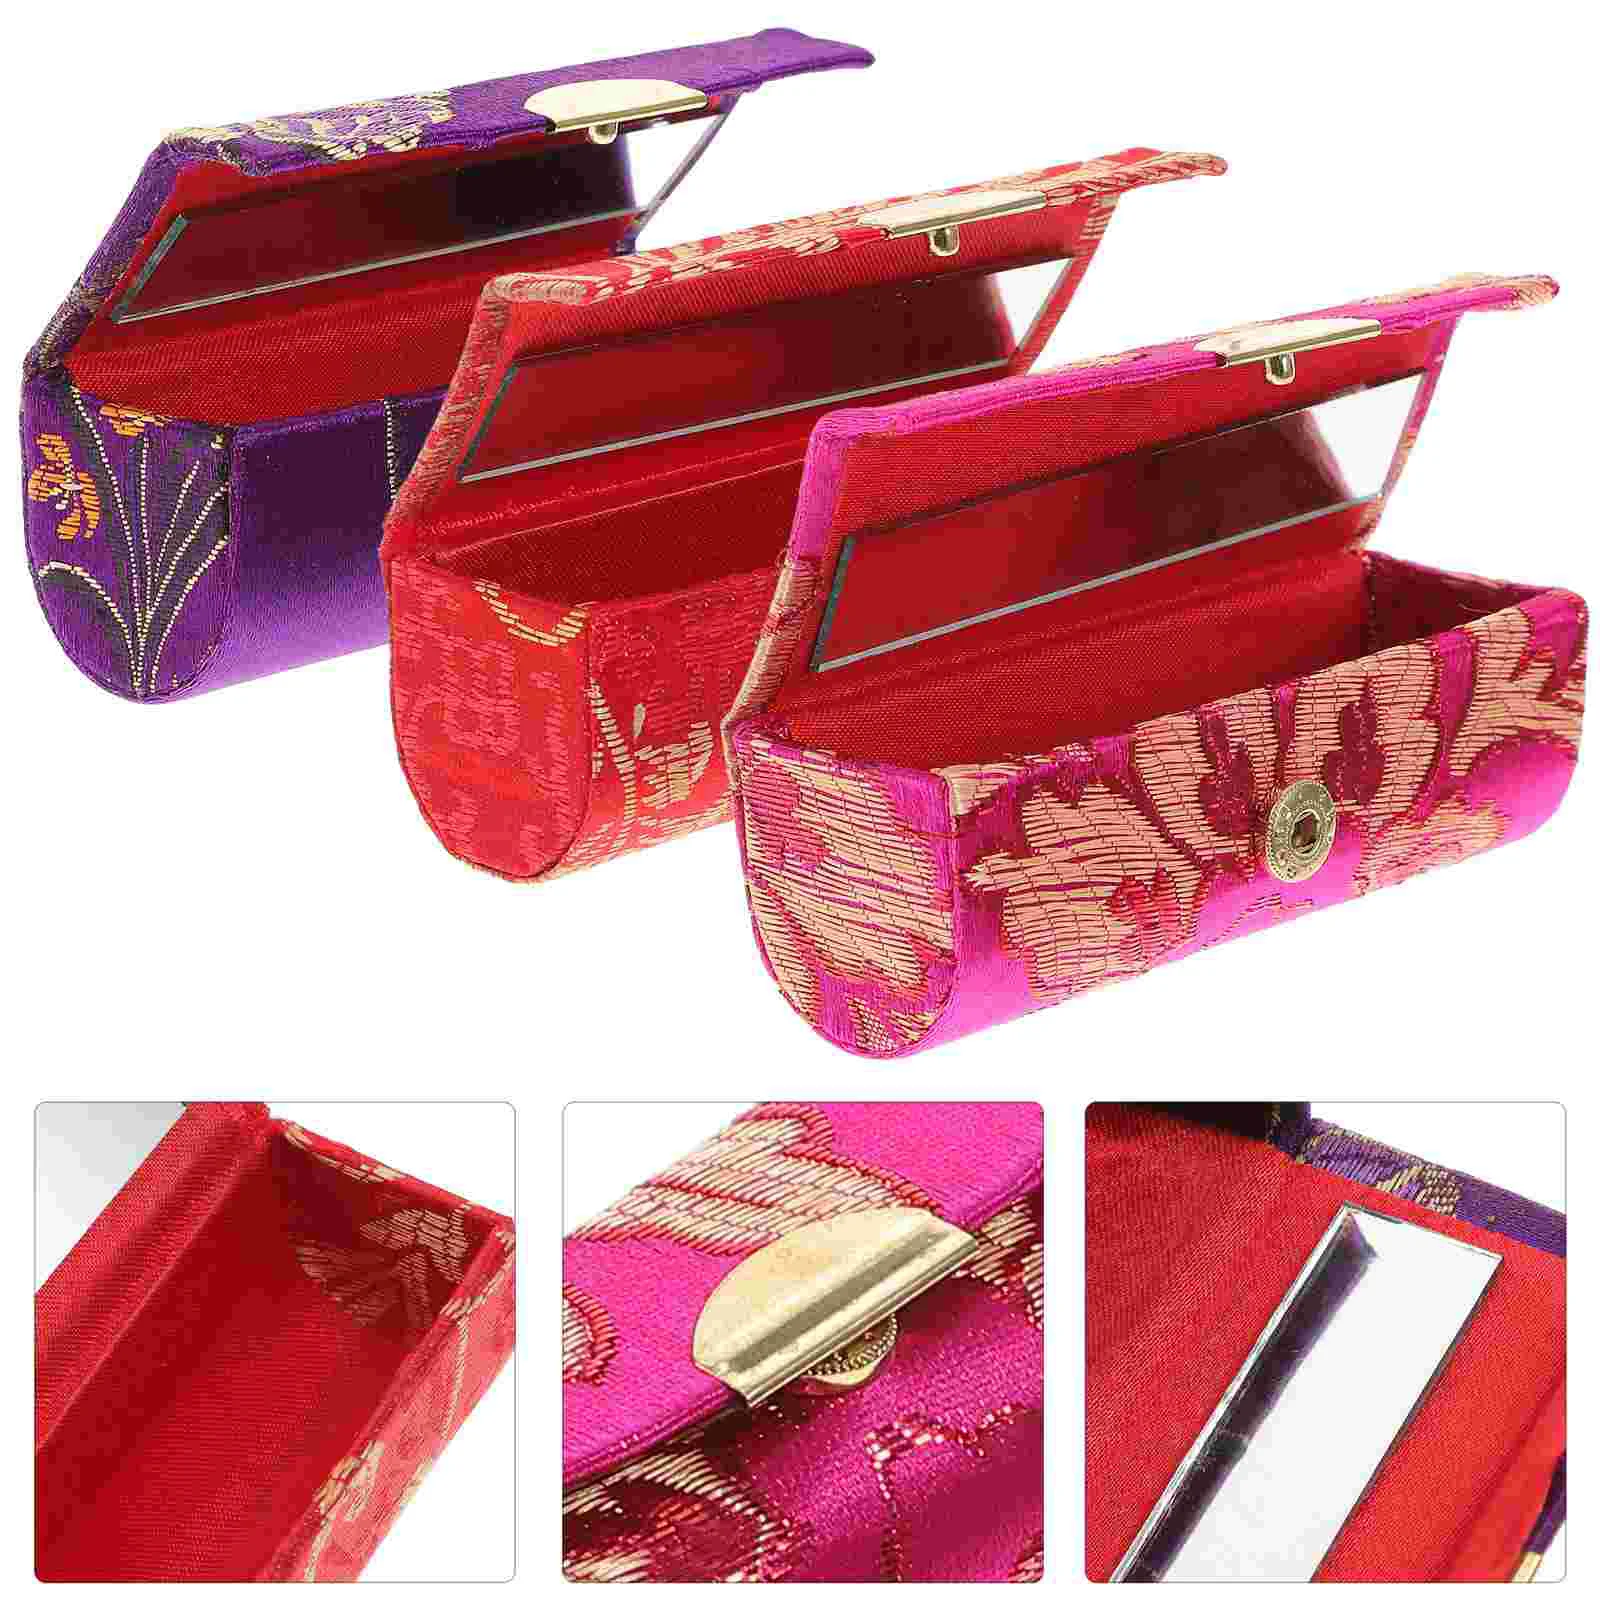 1 Pcs Coin Lipstick Holder Random Color Embroidered Flower Design Lipstick  Case Box with Mirror Hasp Cosmetic Bags